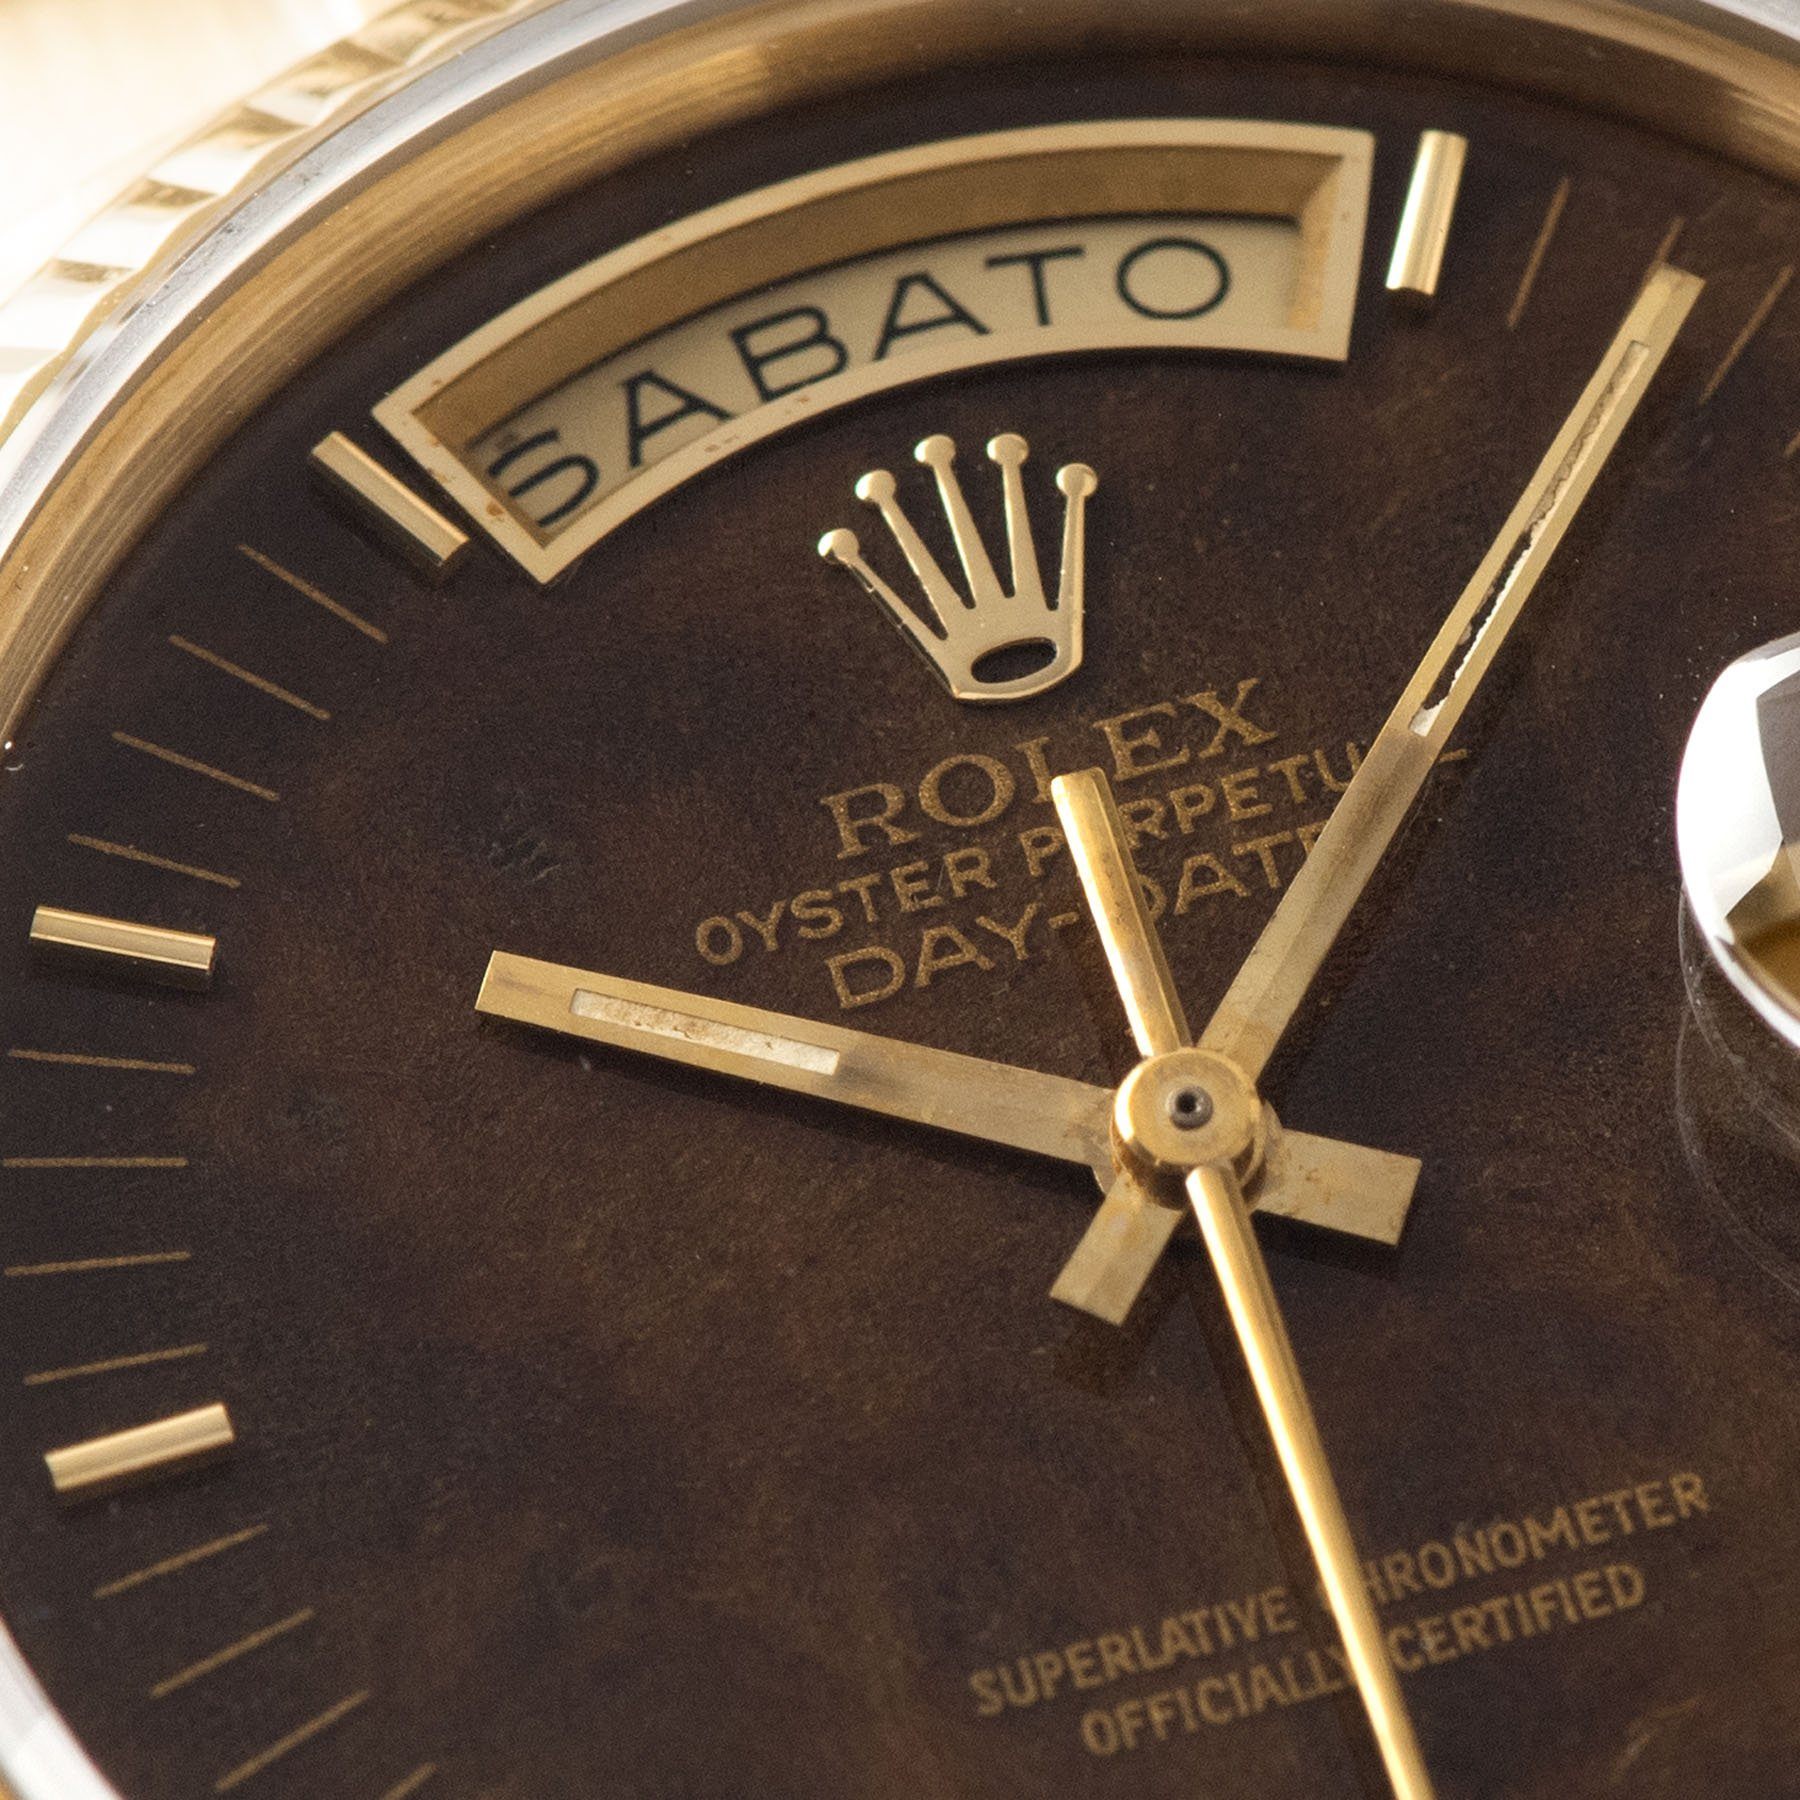 Rolex Day-Date Dark Wood Dial Reference 18038